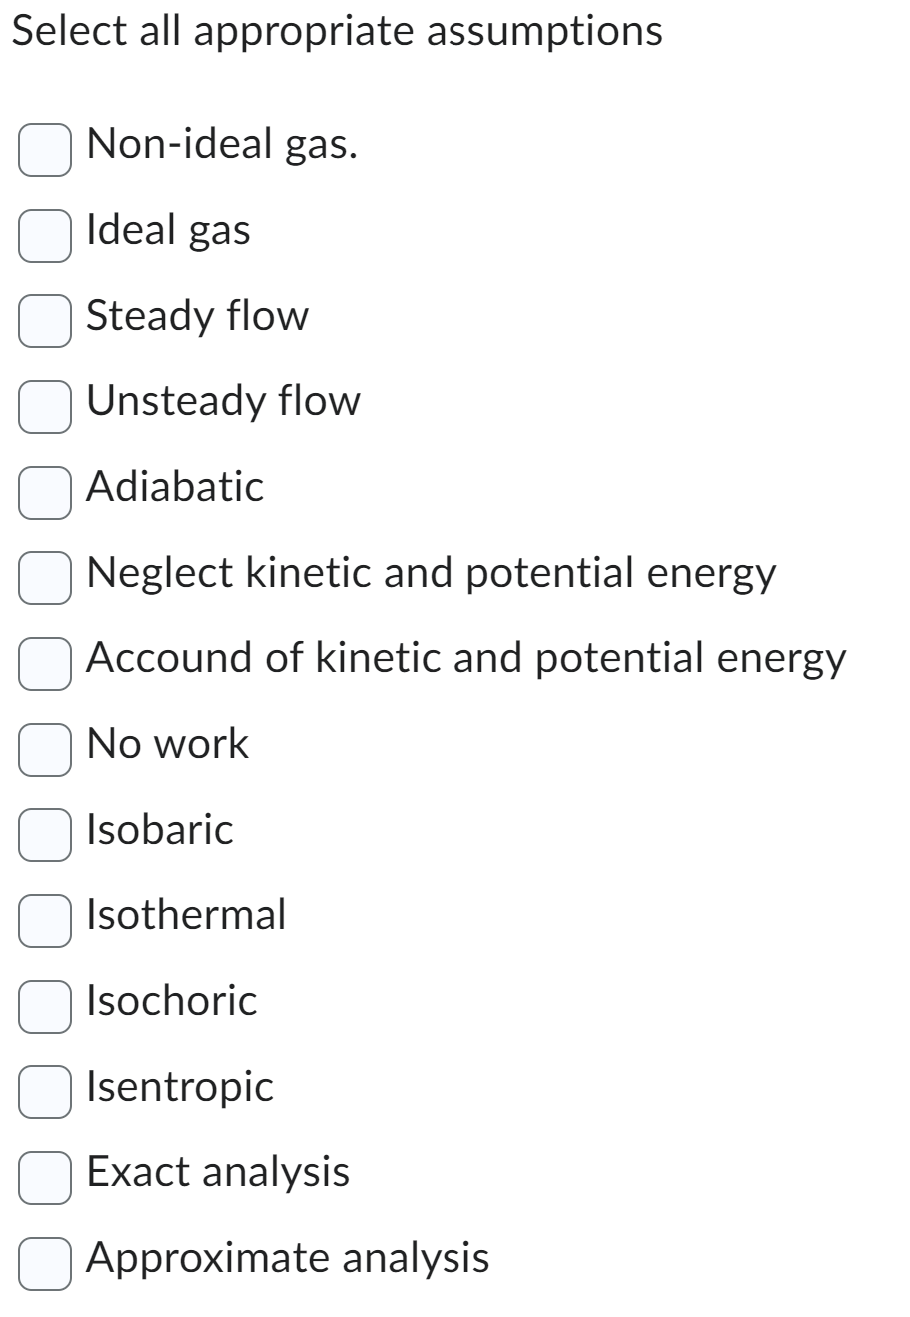 Select all appropriate assumptions
Non-ideal gas.
Ideal gas
Steady flow
Unsteady flow
Adiabatic
Neglect kinetic and potential energy
Accound of kinetic and potential energy
No work
Isobaric
Isothermal
Isochoric
Isentropic
Exact analysis
Approximate analysis